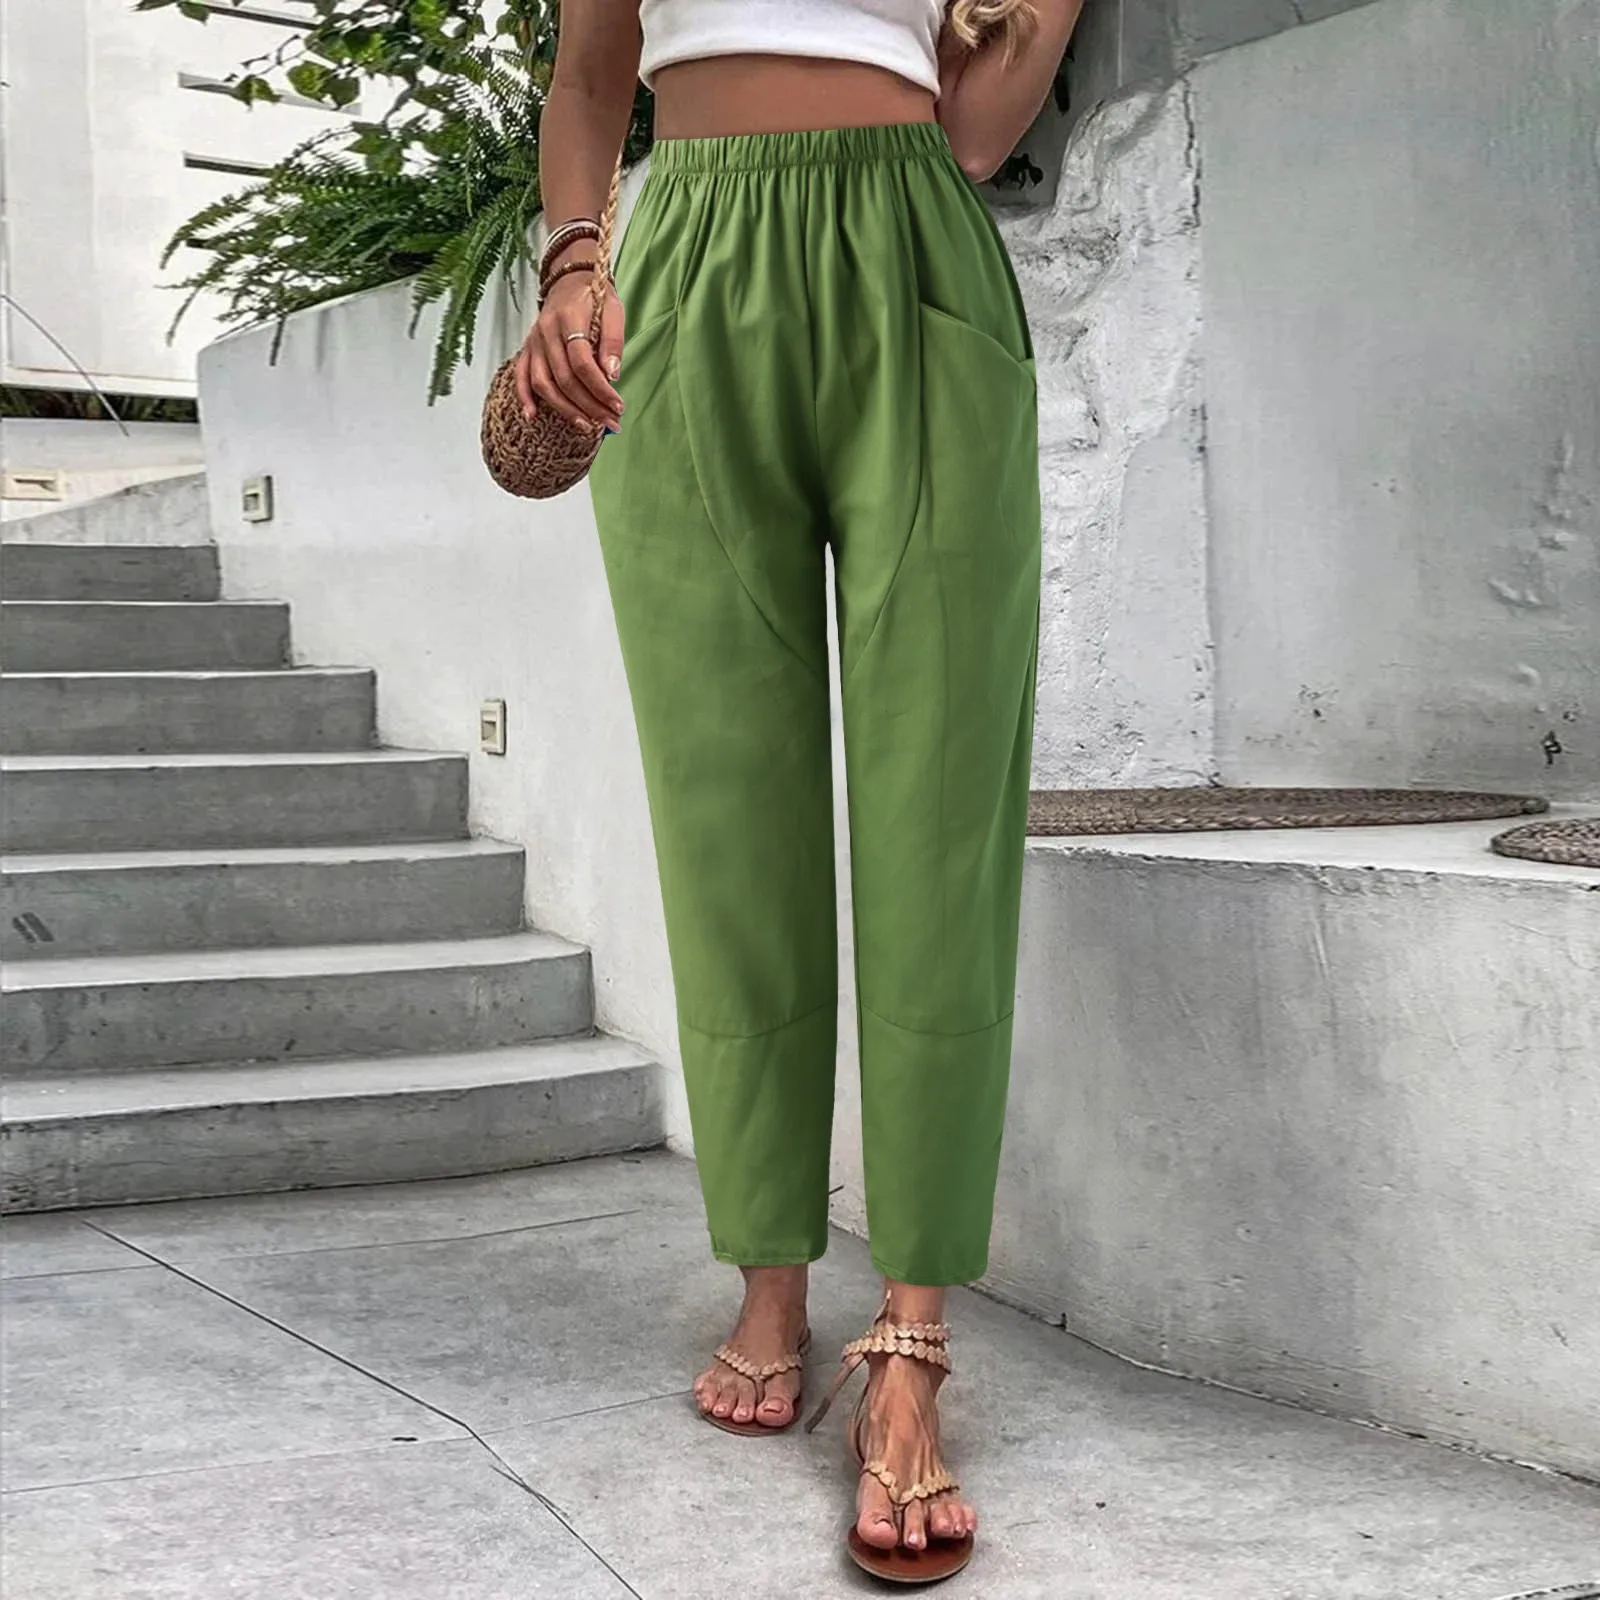 

Summer Casual Cropped Trousers Solid Color Pants Elastic Pantalettes Loose Breathable Women Pants Vacation Holiday Pantalon New